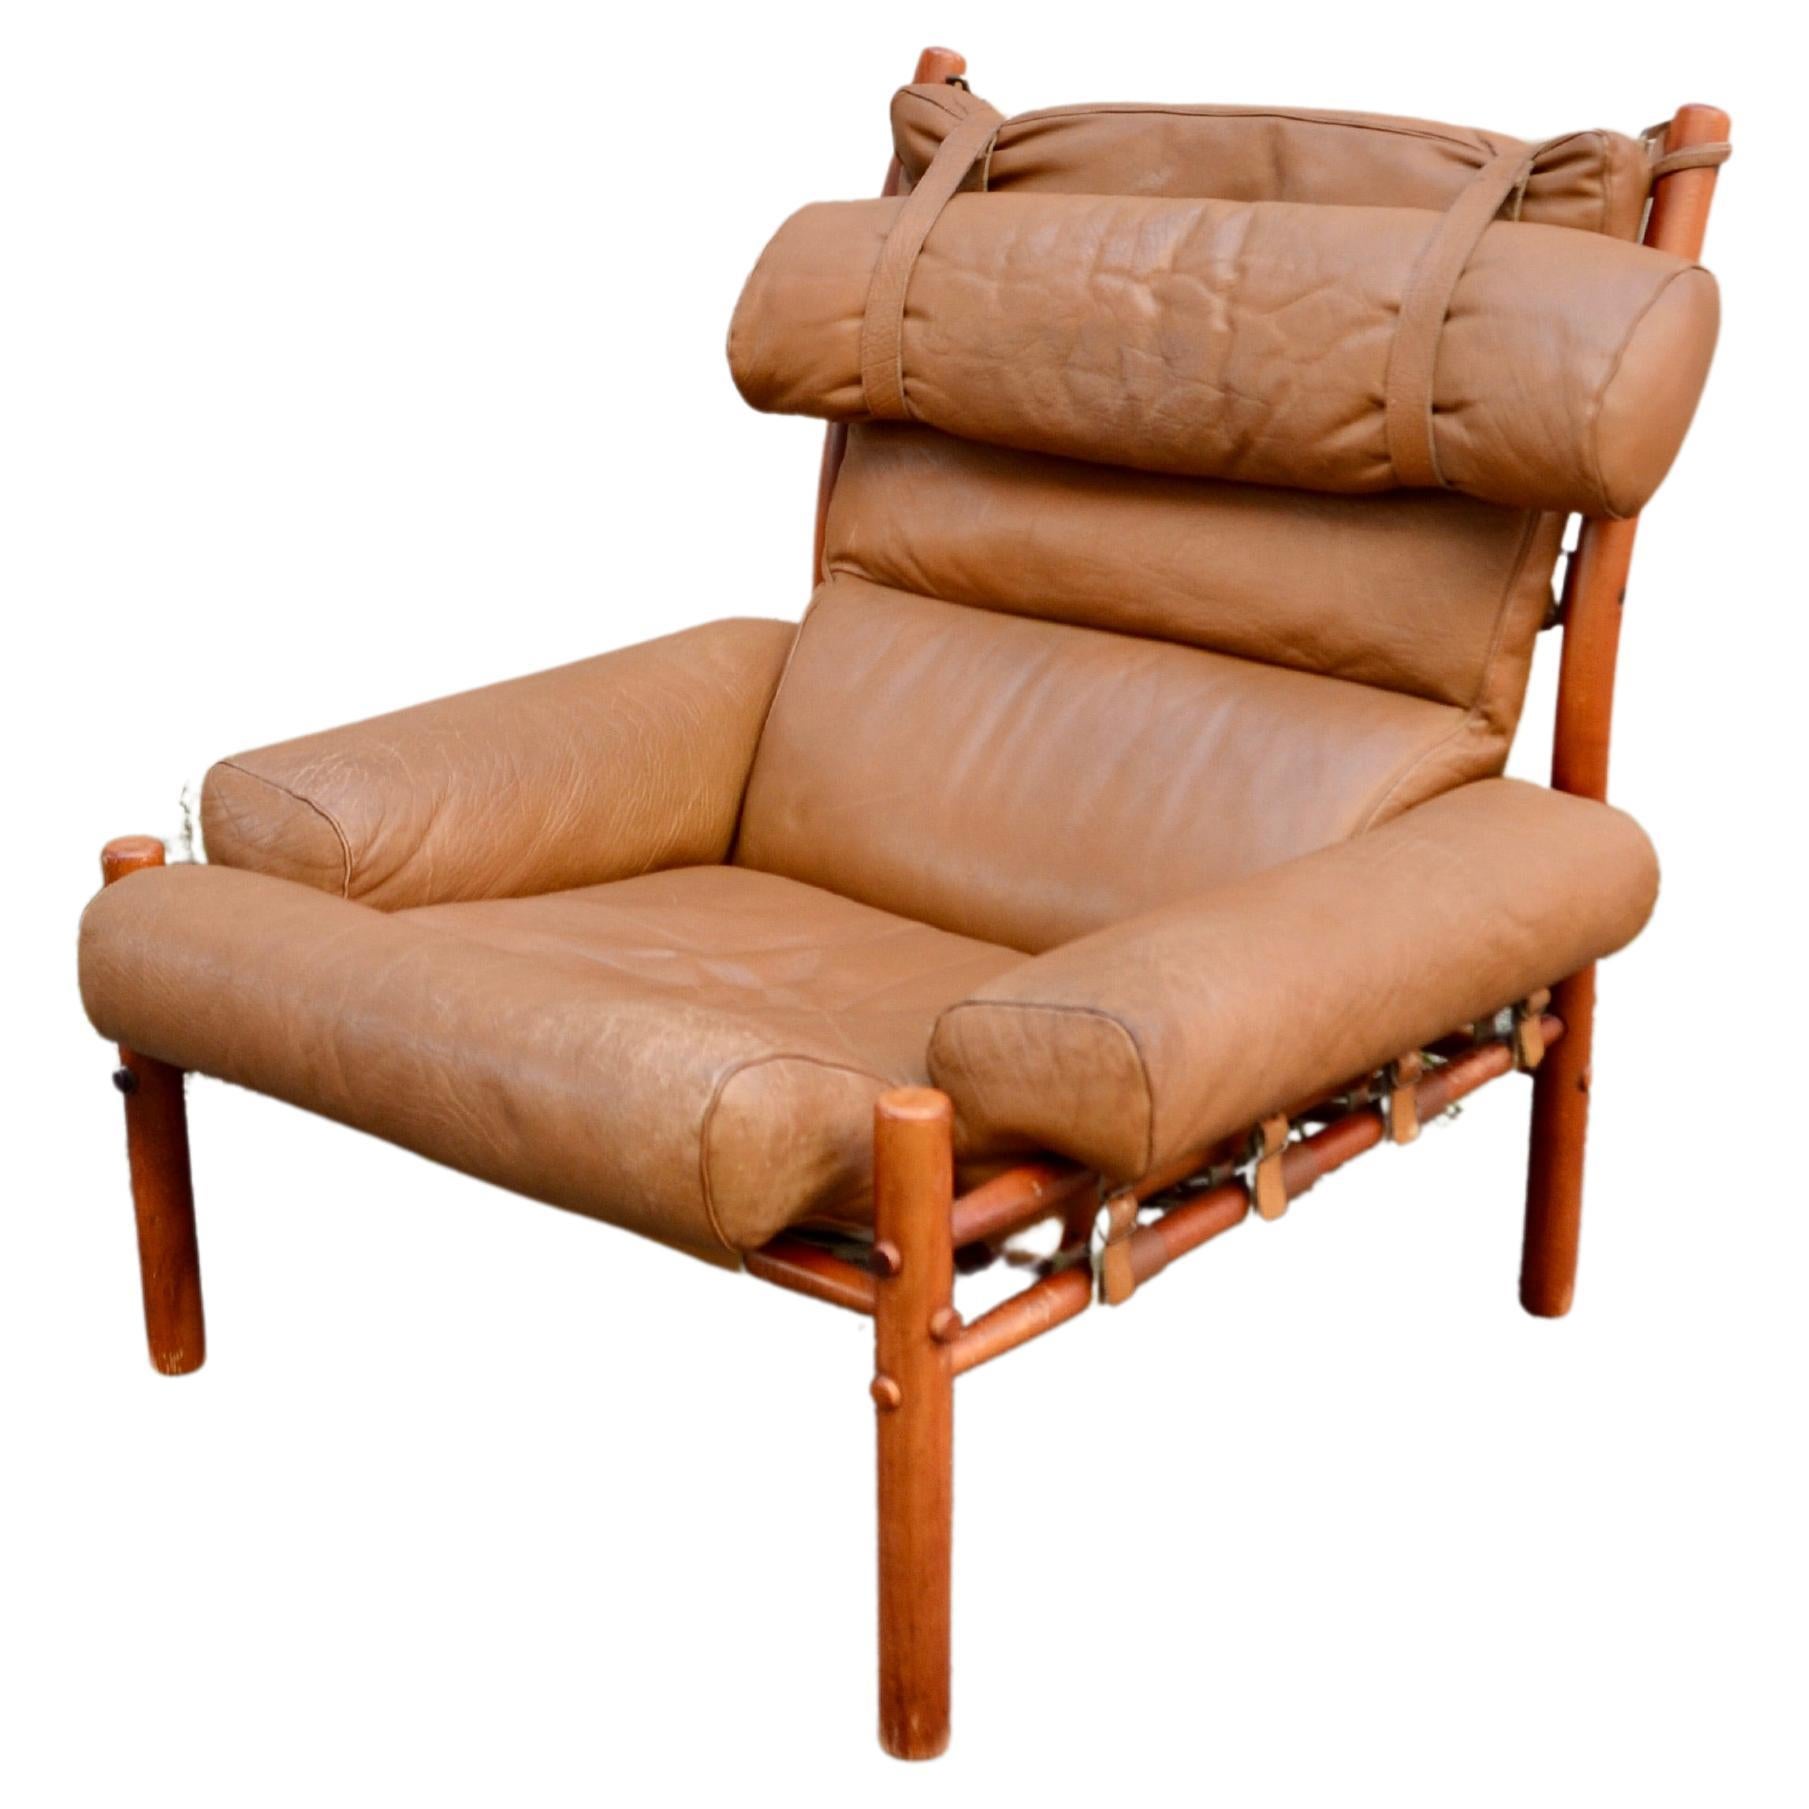 Arne Norell Model Inca Caramel Leather Lounge Chair